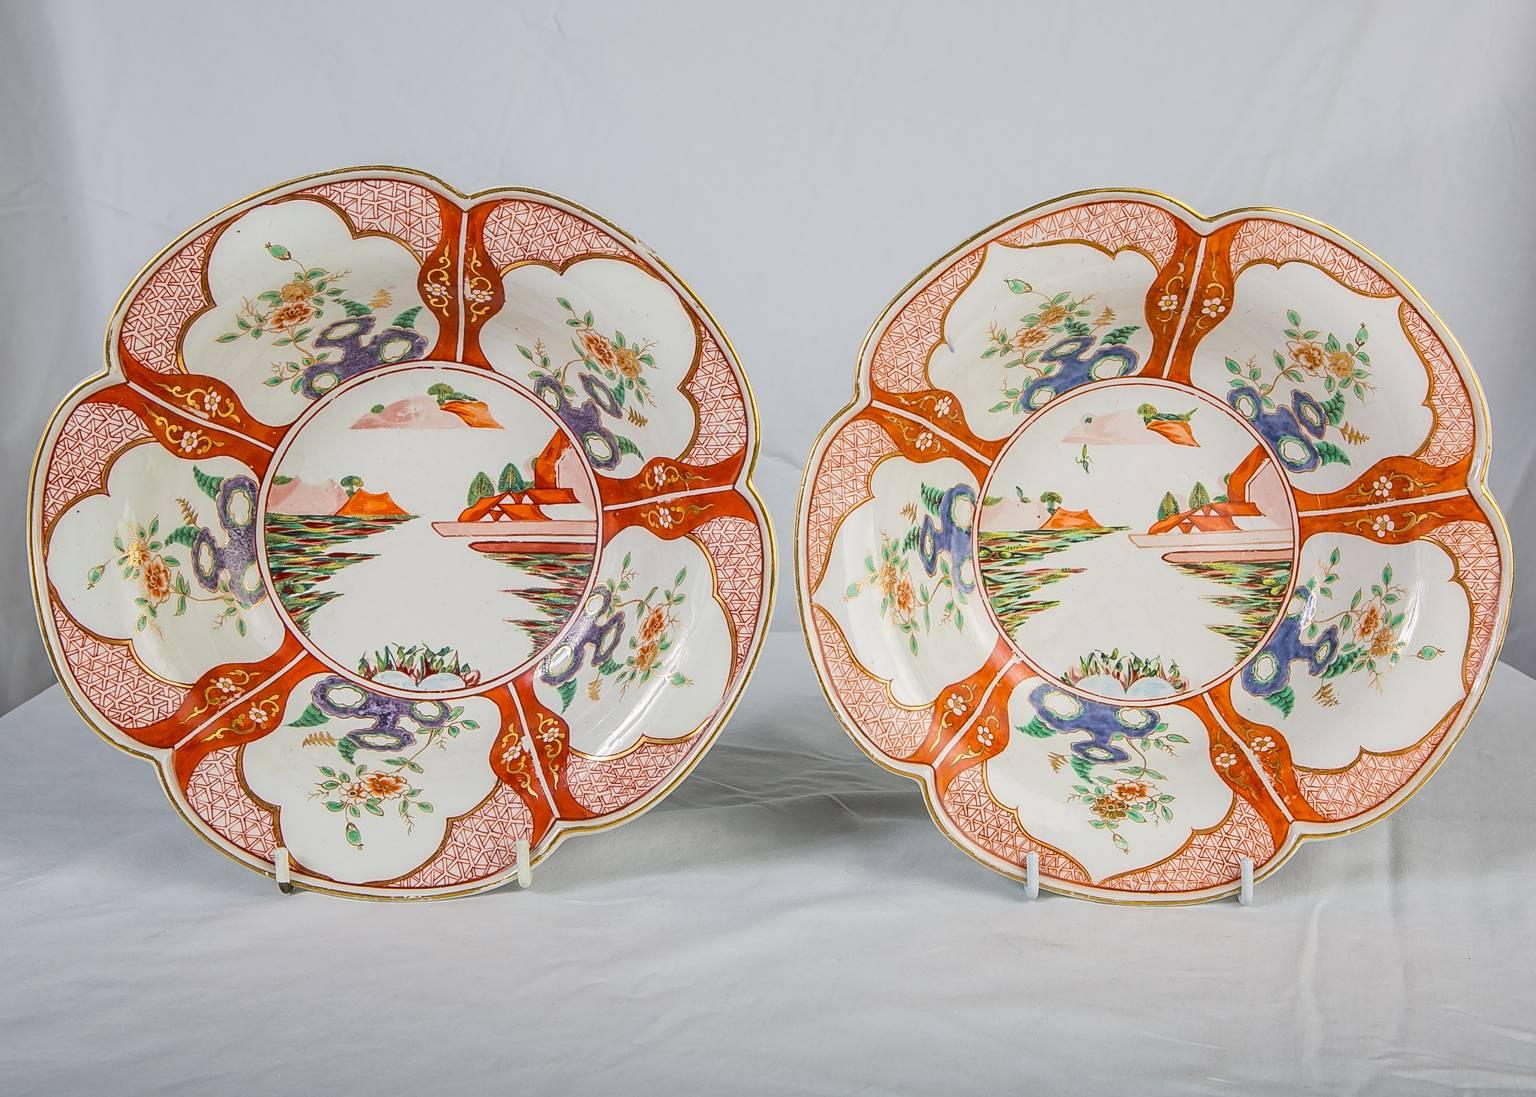  This rare and exquisite pair of hand-painted porcelain bowls were made by Derby Porcelain in mid-18th century England, circa 1765. This was only ten years after the start of the Derby factory under the control of William Duesbury. 
The shaped bowls